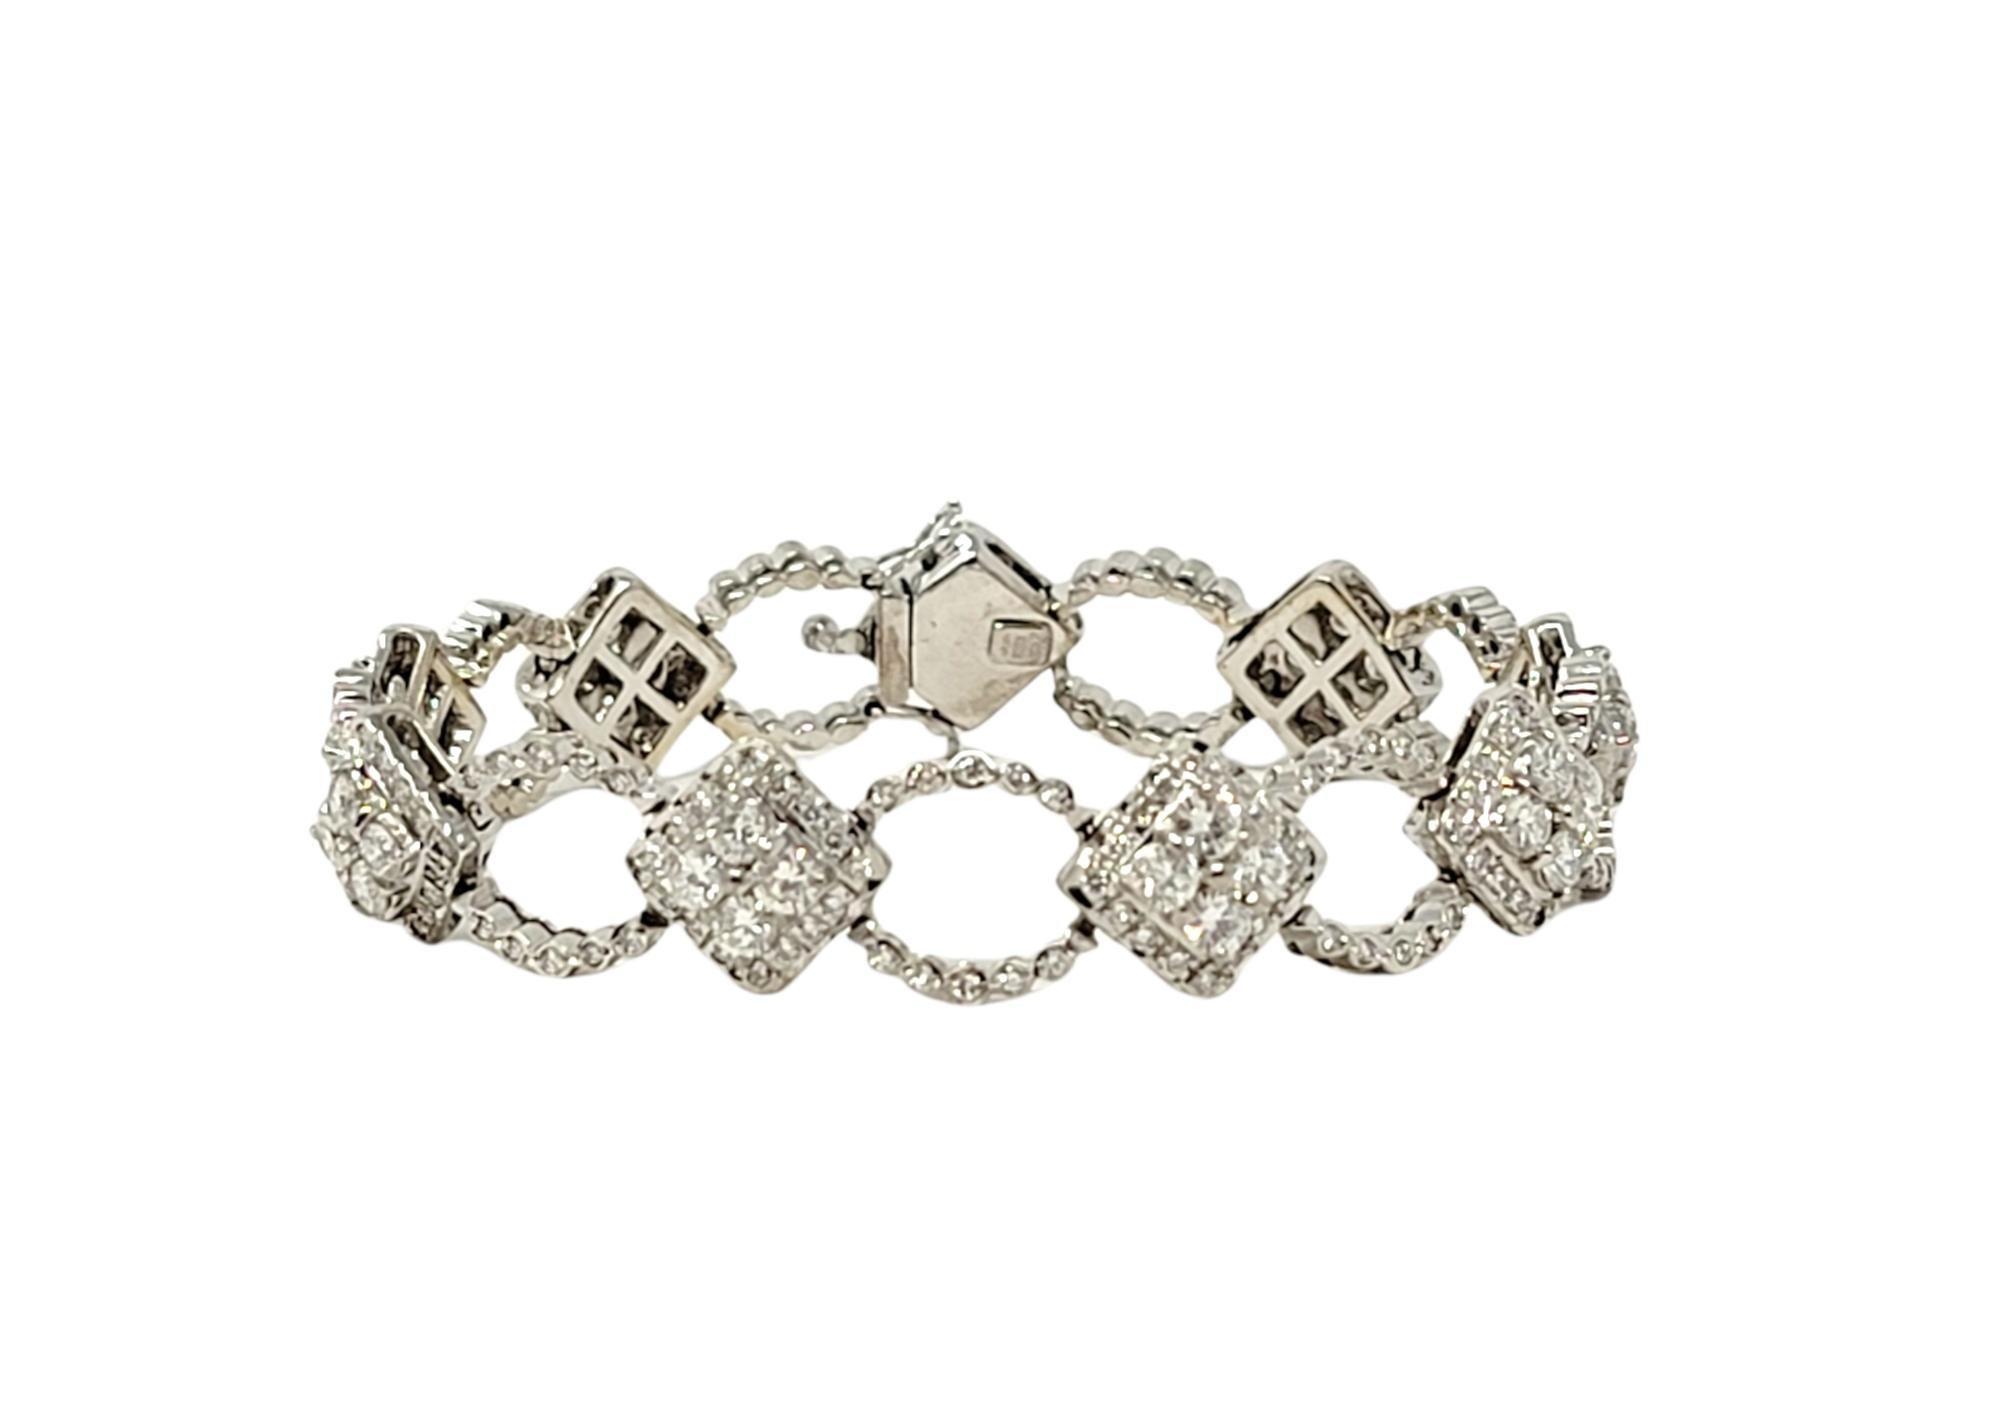 This absolutely gorgeous diamond link bracelet exudes modern elegance and glamour. This stunningly sparkly  piece features oval and diamond shaped 18 karat white gold links set in an alternating pattern throughout. The glittering diamonds sparkle